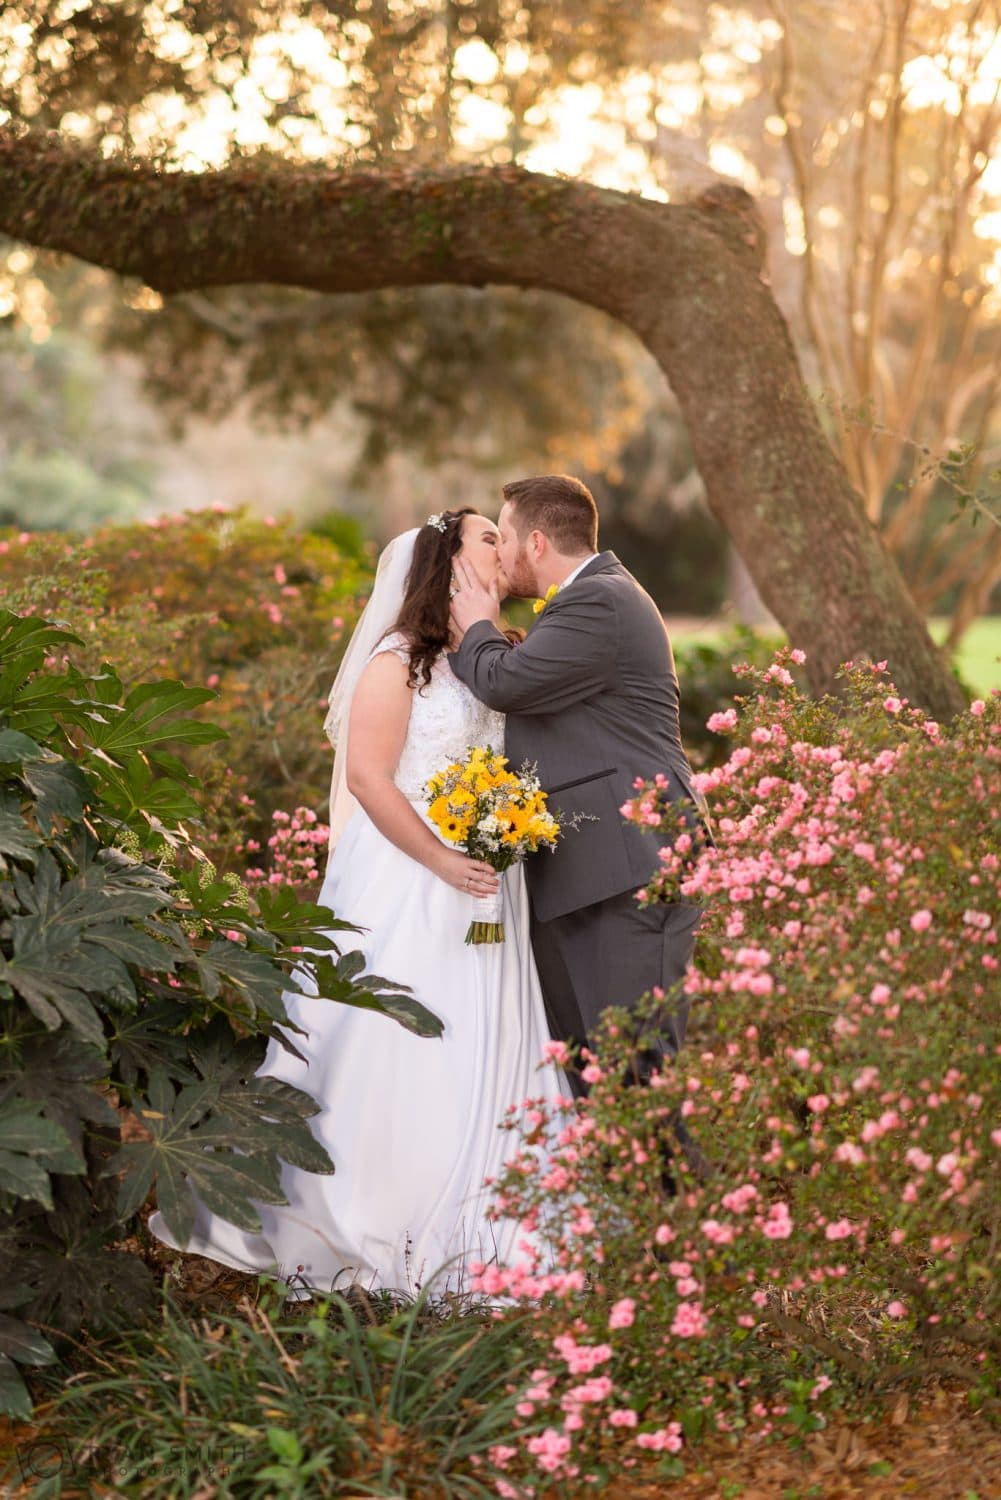 Kiss in the flowers at sunset Litchfield Country Club